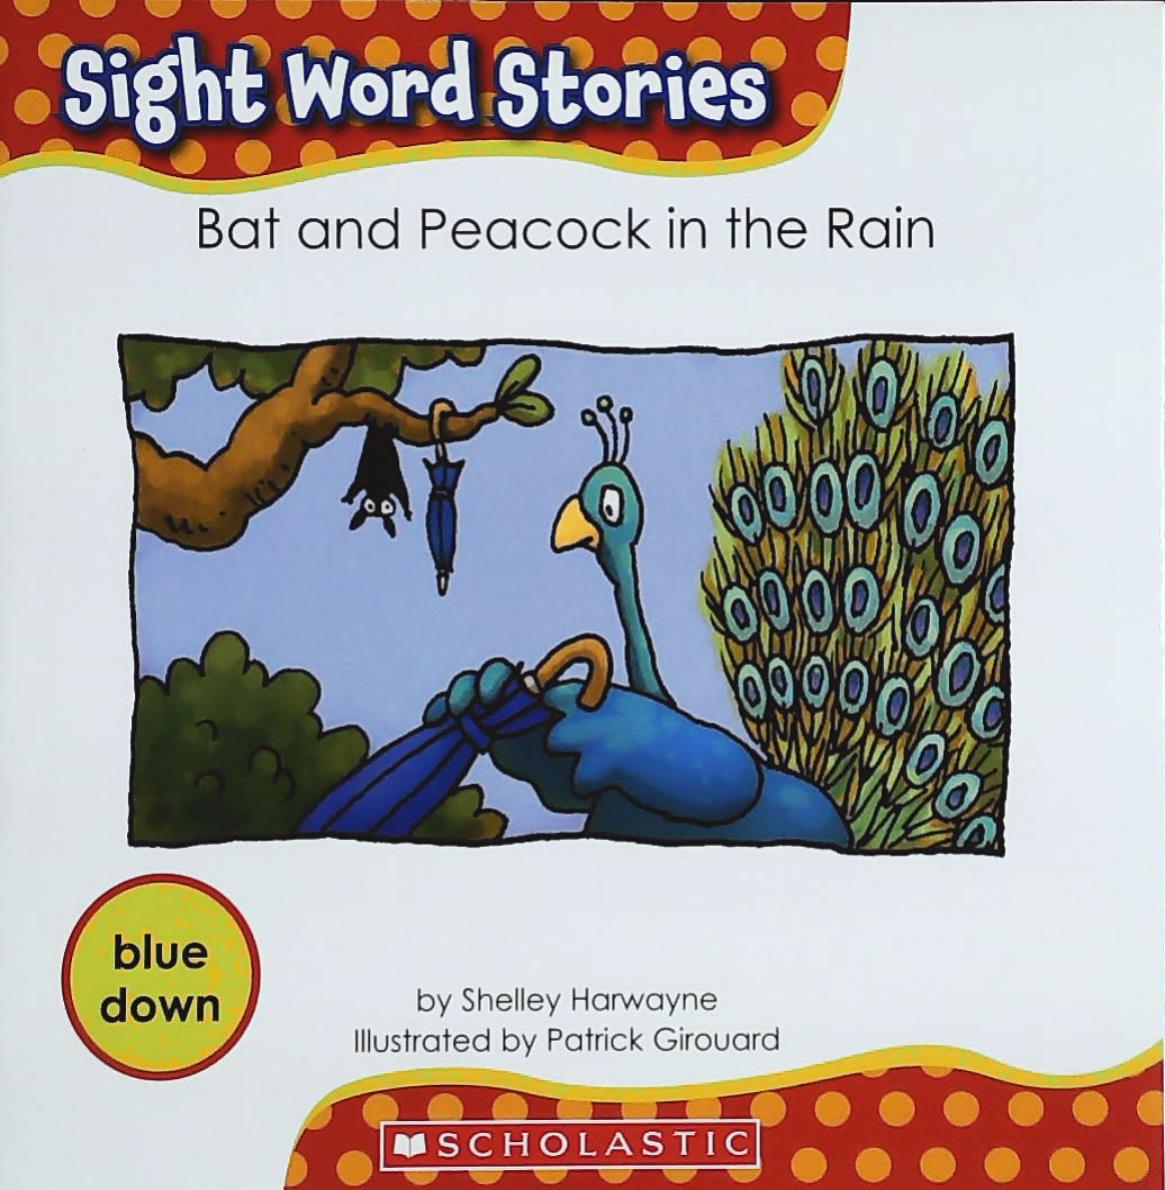 Livre ISBN 0545167612 Sight Word Stories : Bat and Peacock in the Rain (Shelley Harwayne)